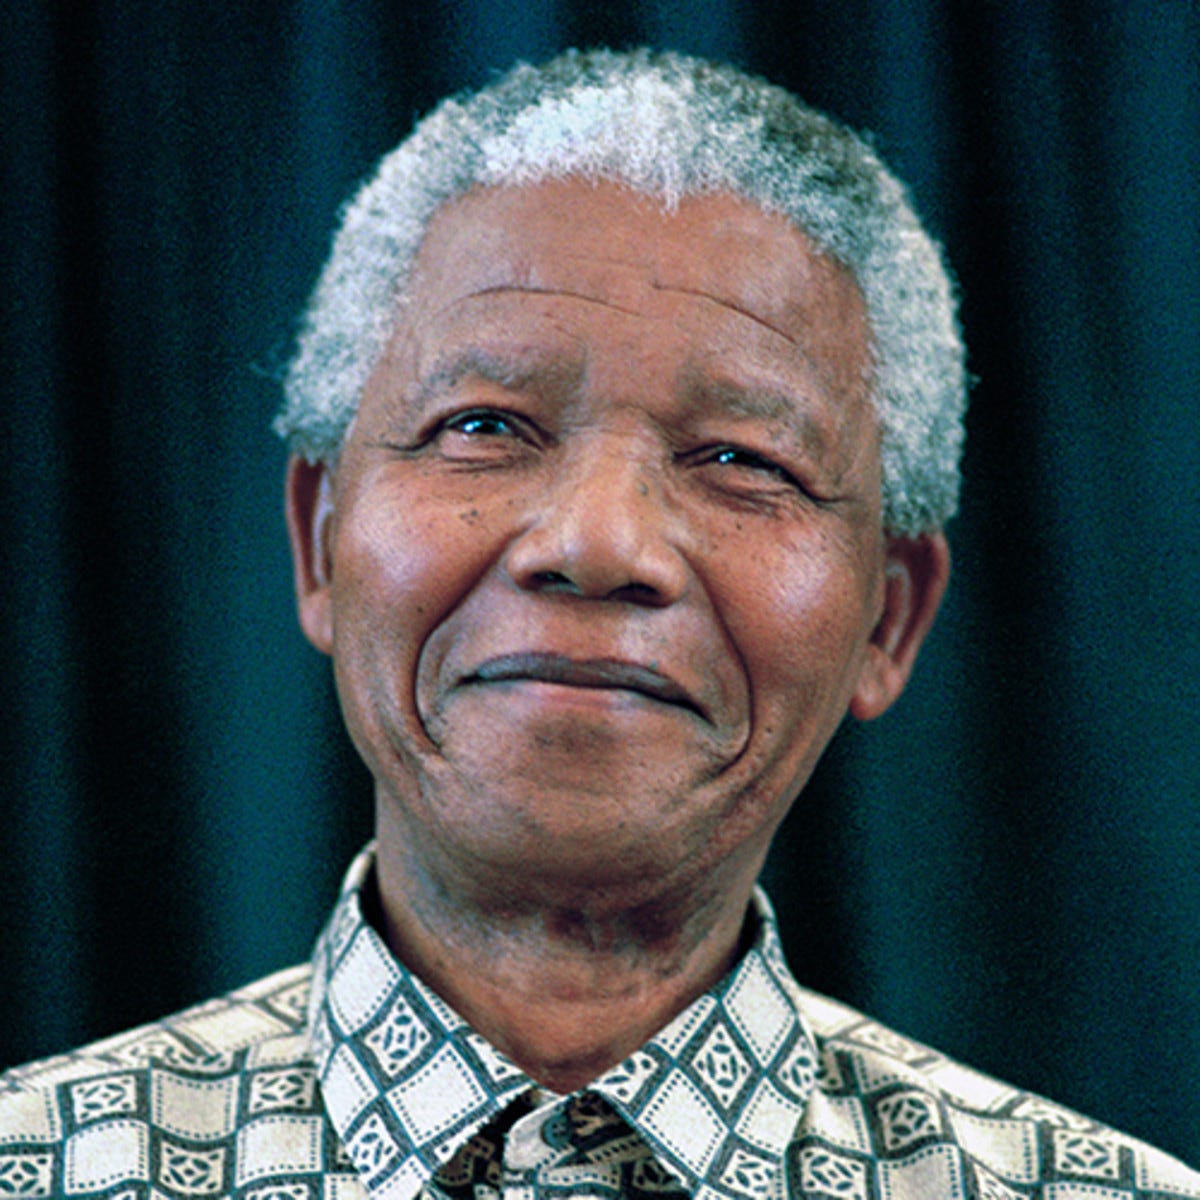 Nelson Mandela - Quotes, Facts & Death - Biography